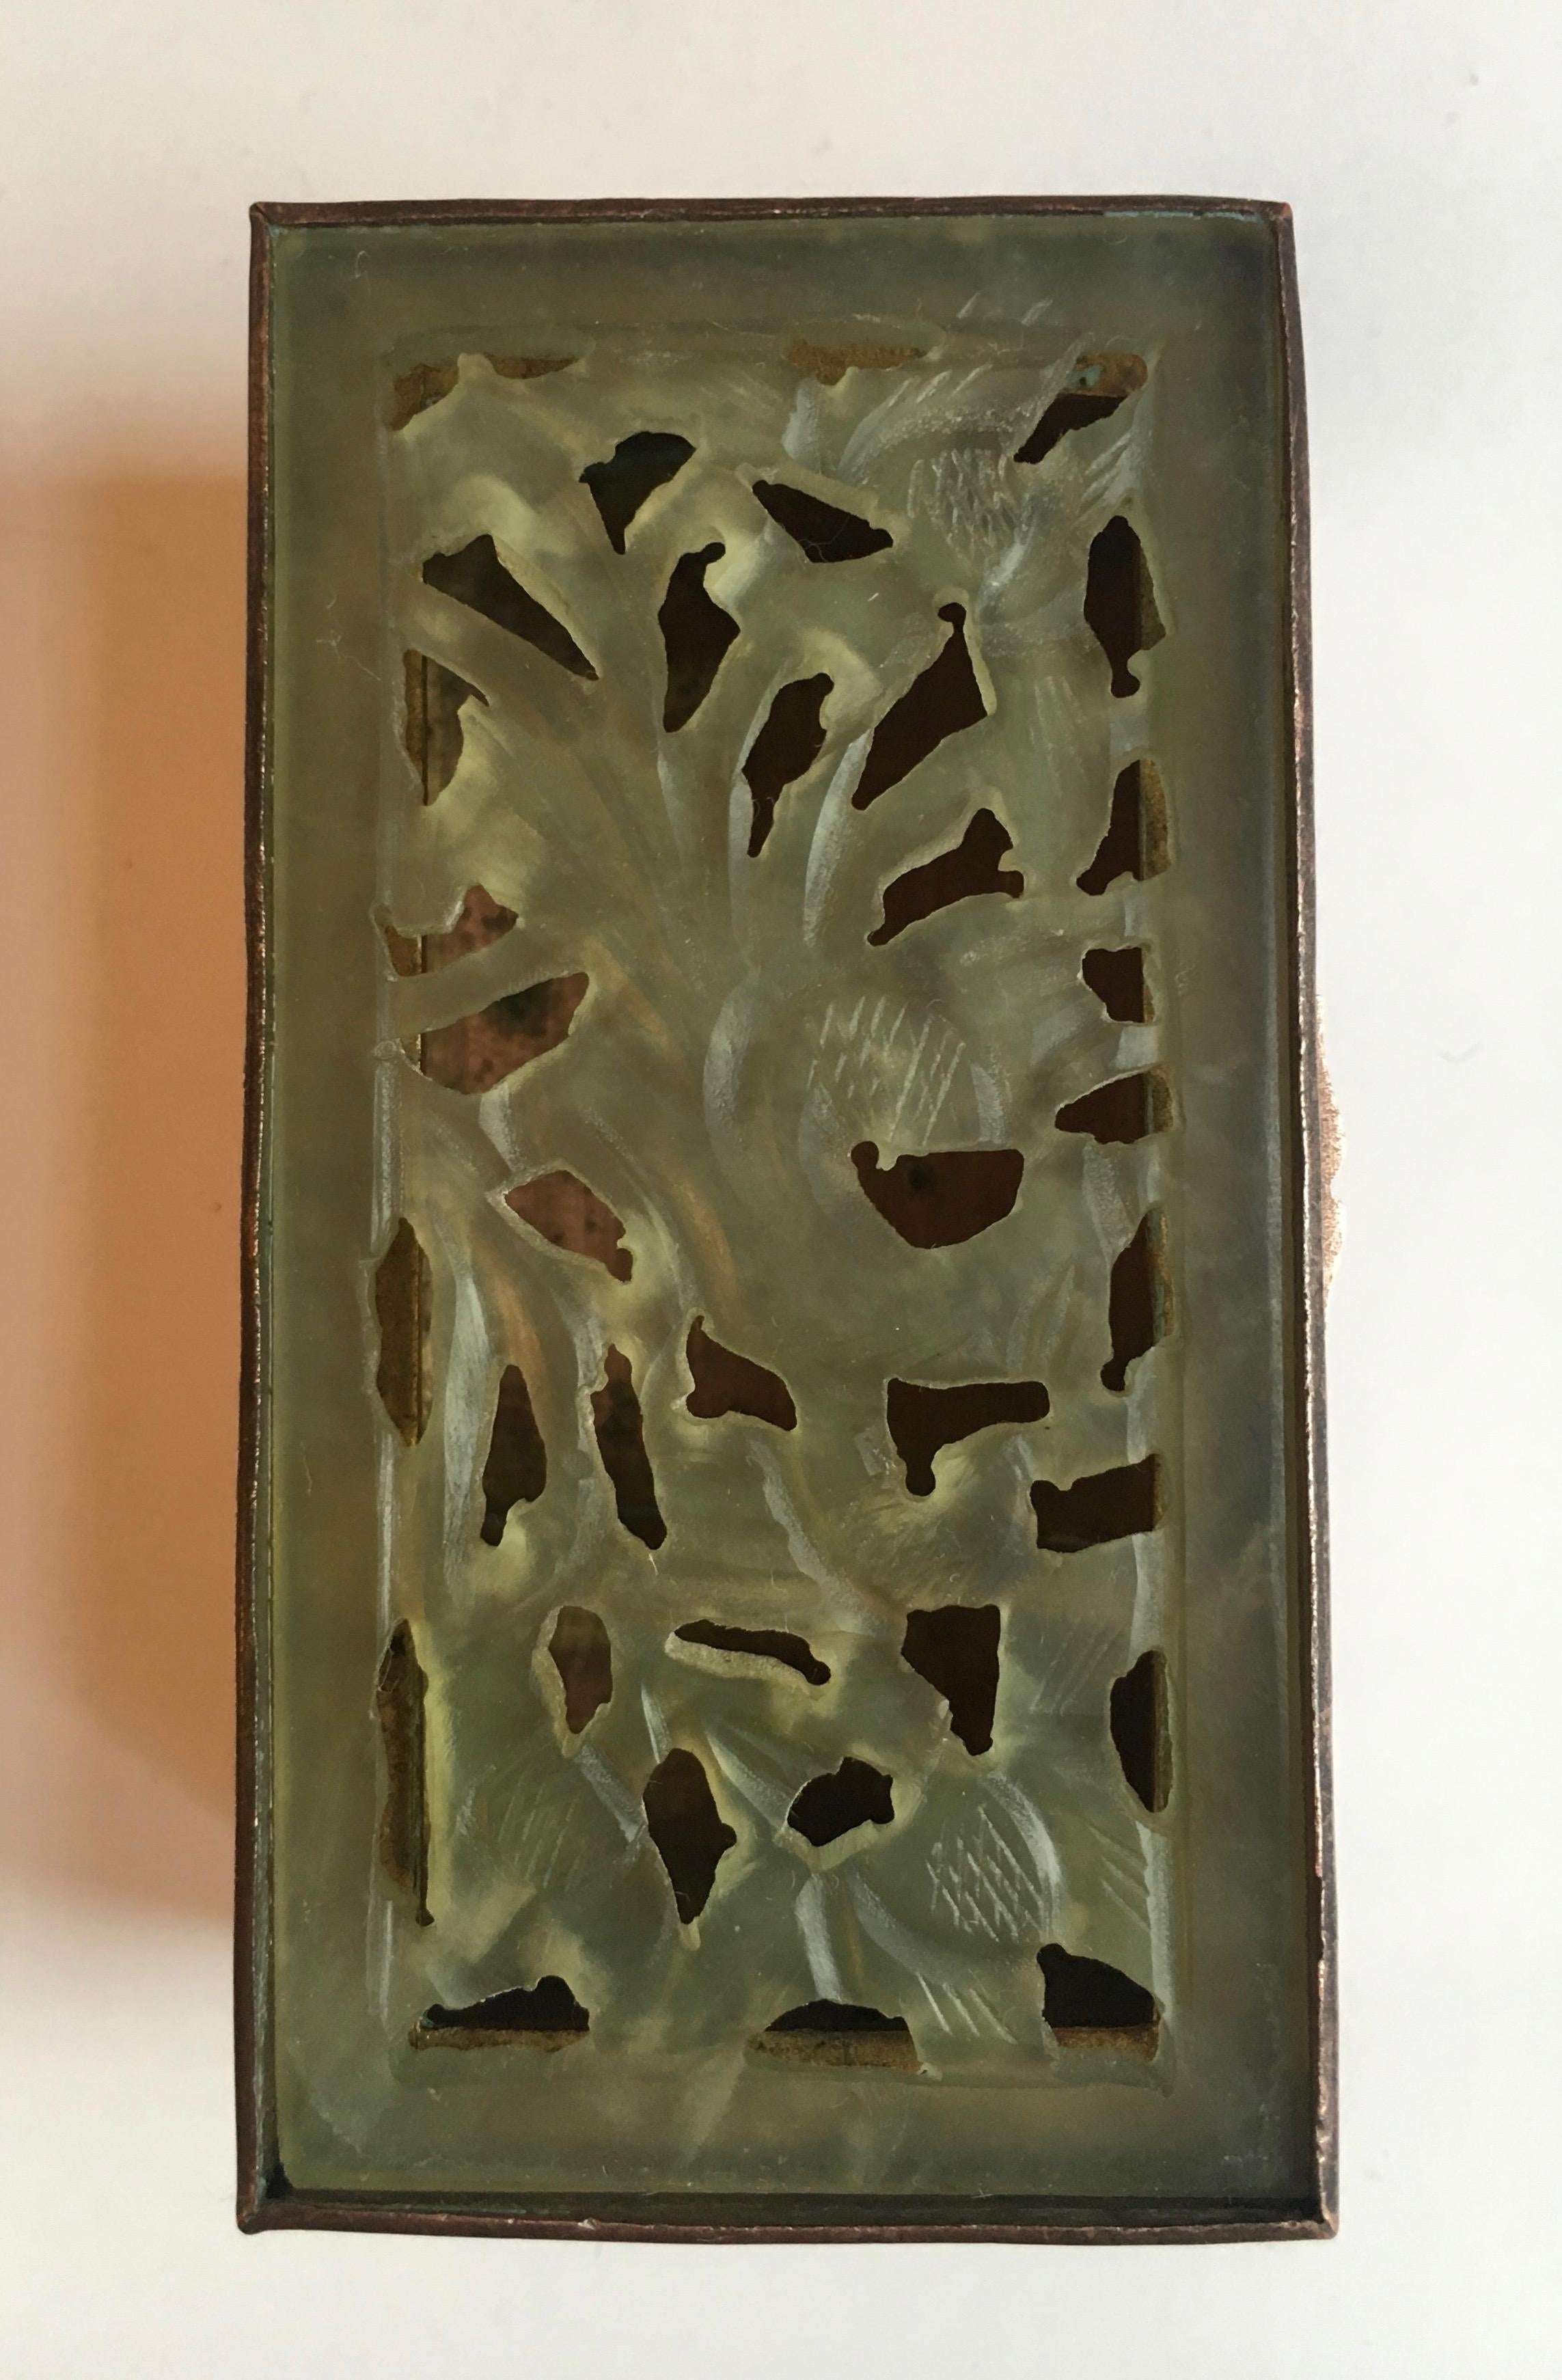 Brass and carved jade box - etched leaves on a brass box with a hinged lid of carved Jade flowers - a lovely trinket or change box for the vanity or dresser. Could also be creatively used in the kitchen.